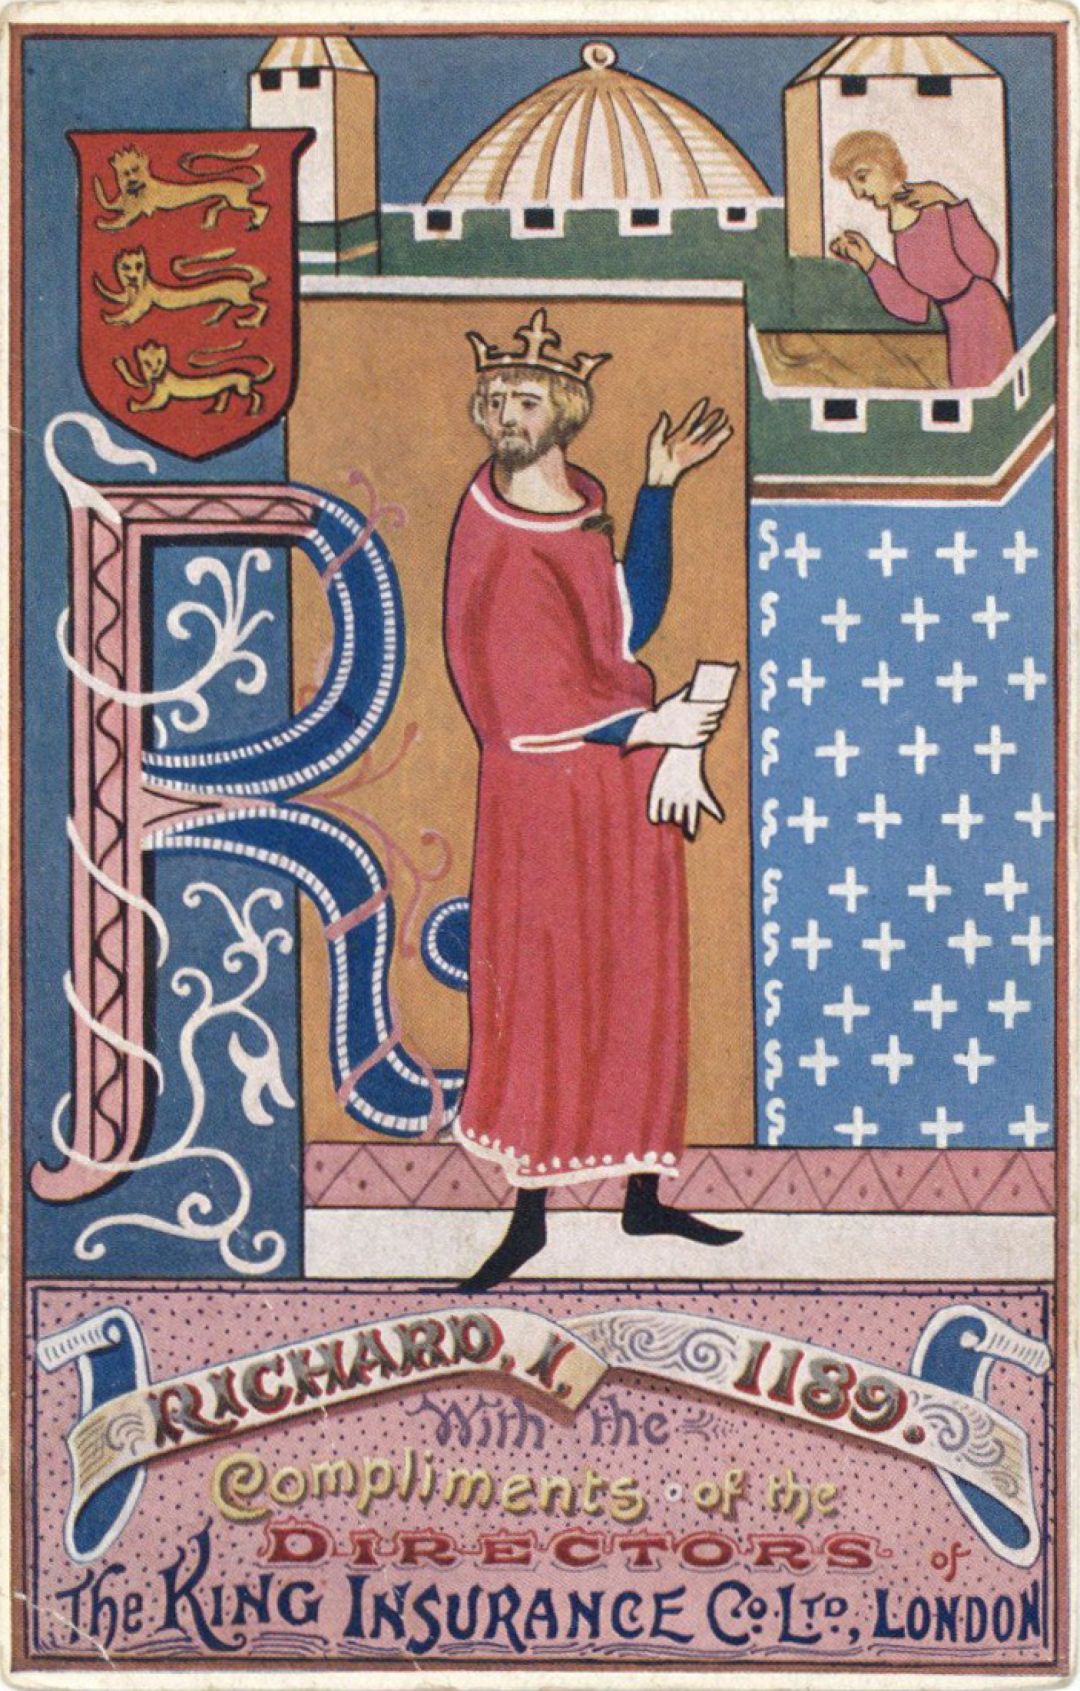 Post Card Ad for King Insurance Co. Ltd. dated 1189 -  Insurance